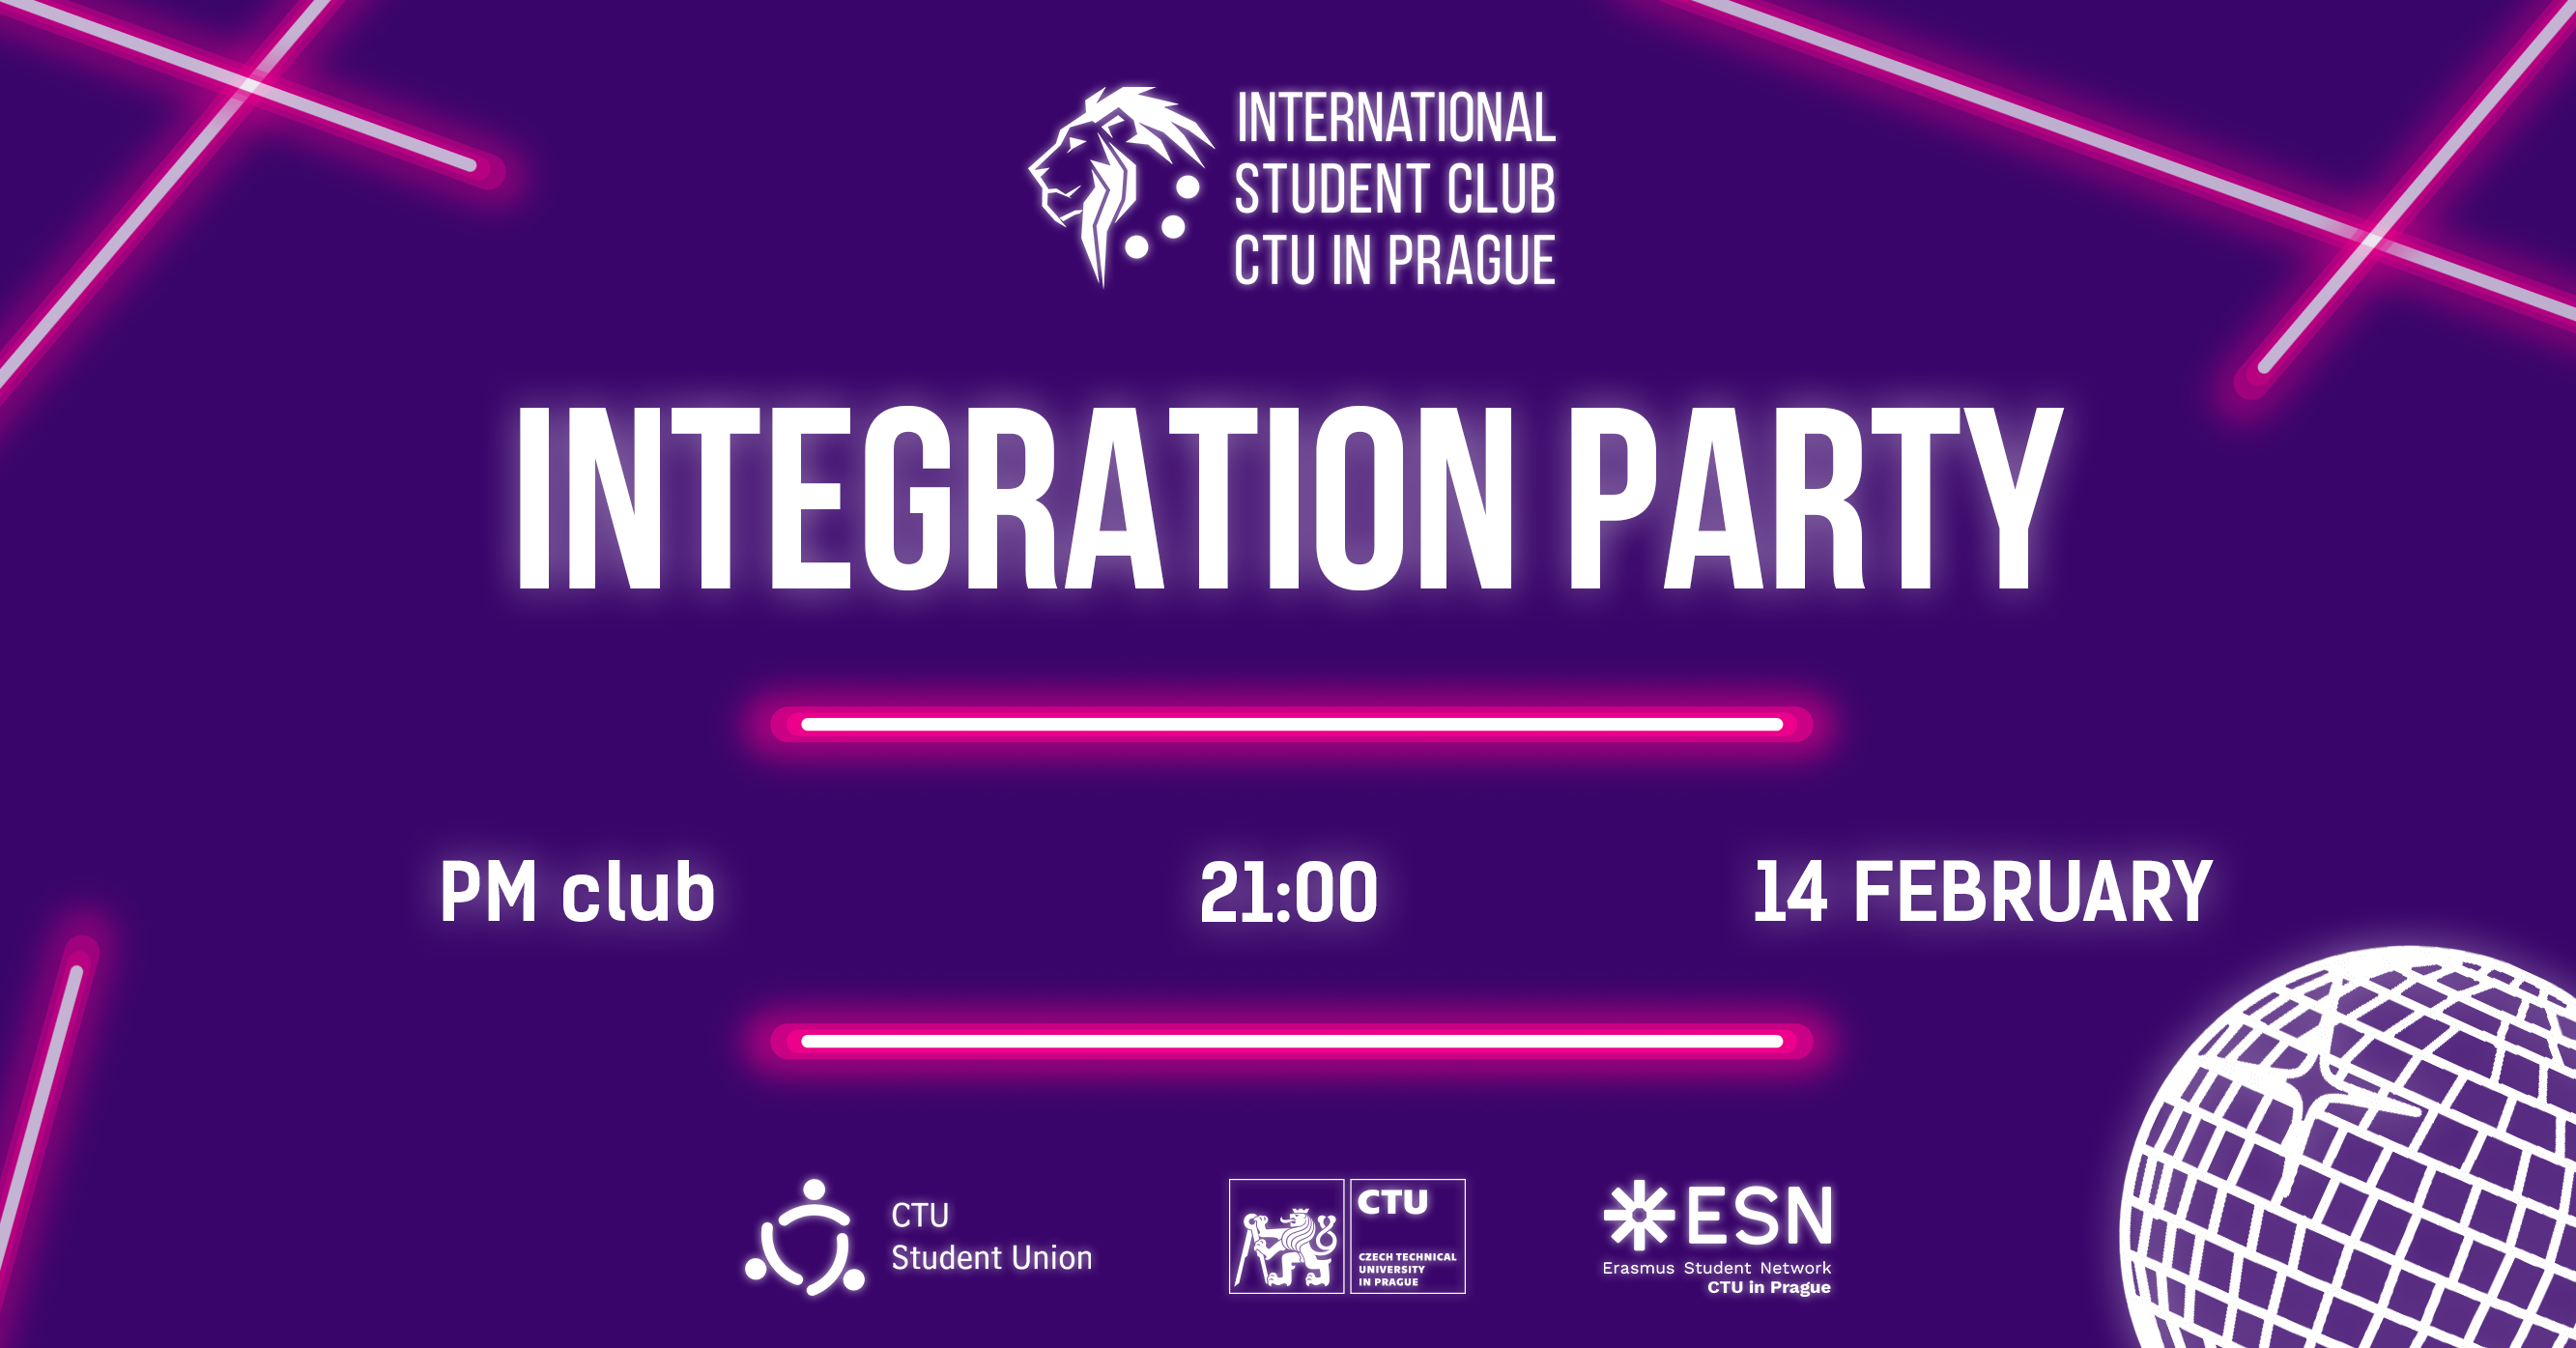 INTEGREATion party